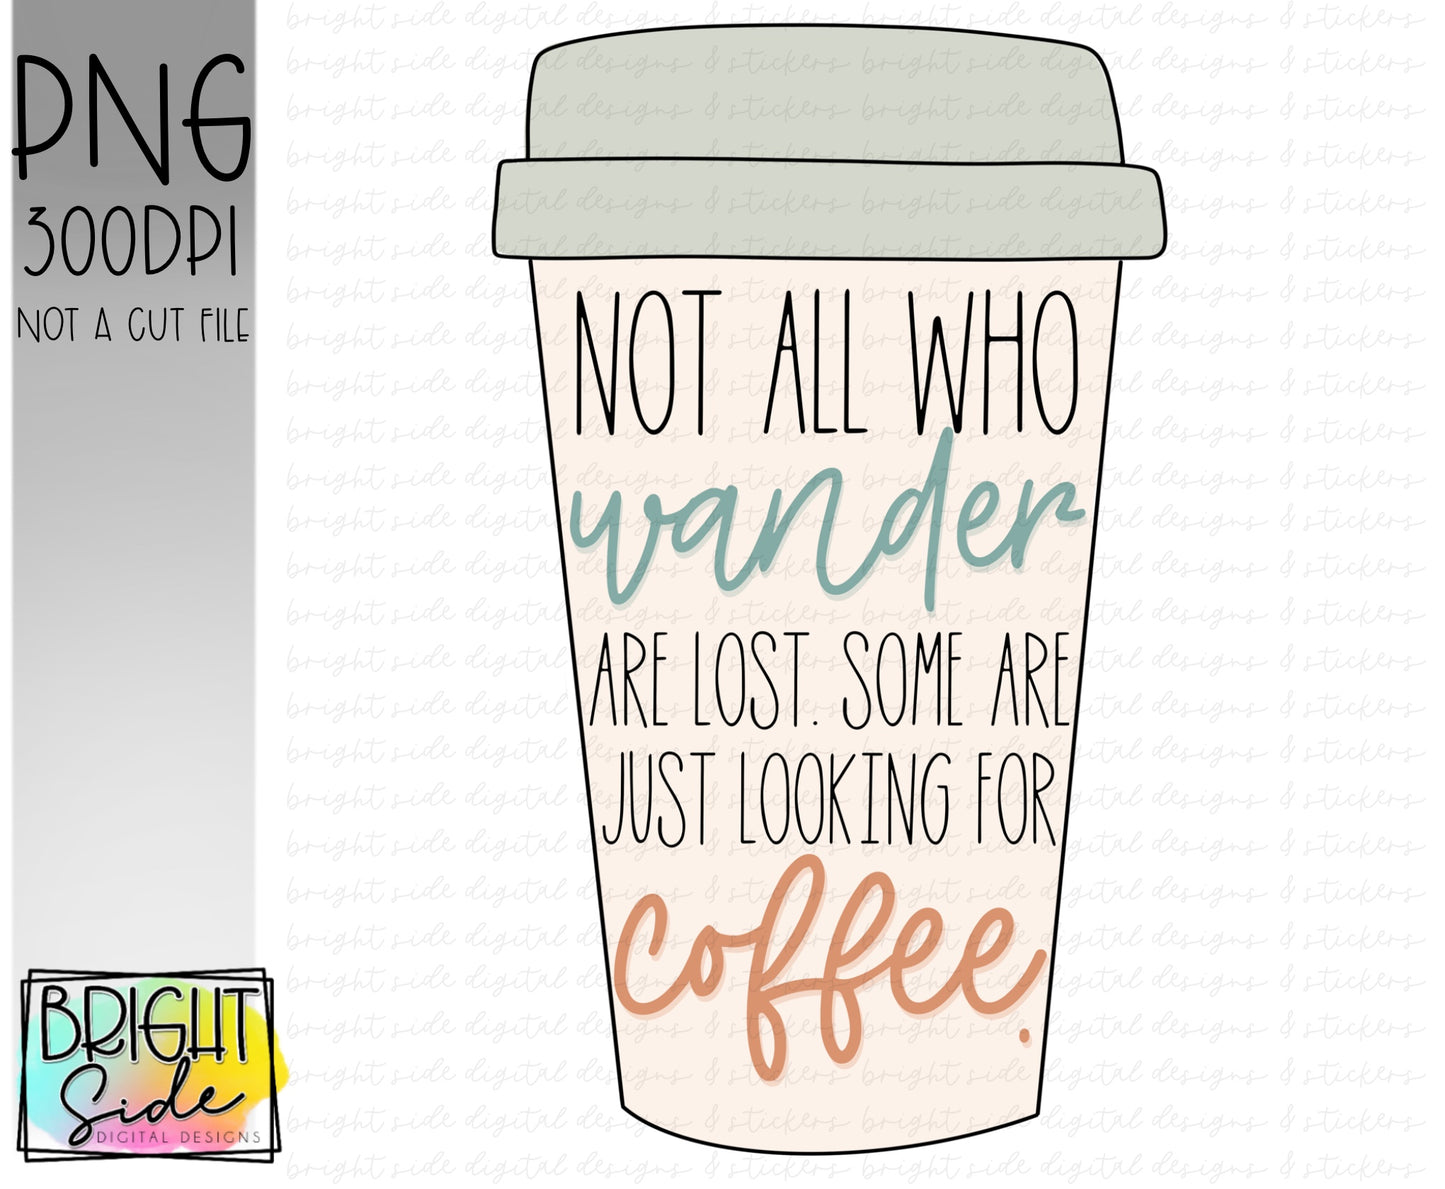 Not all who wander are lost. Some are just looking for coffee.